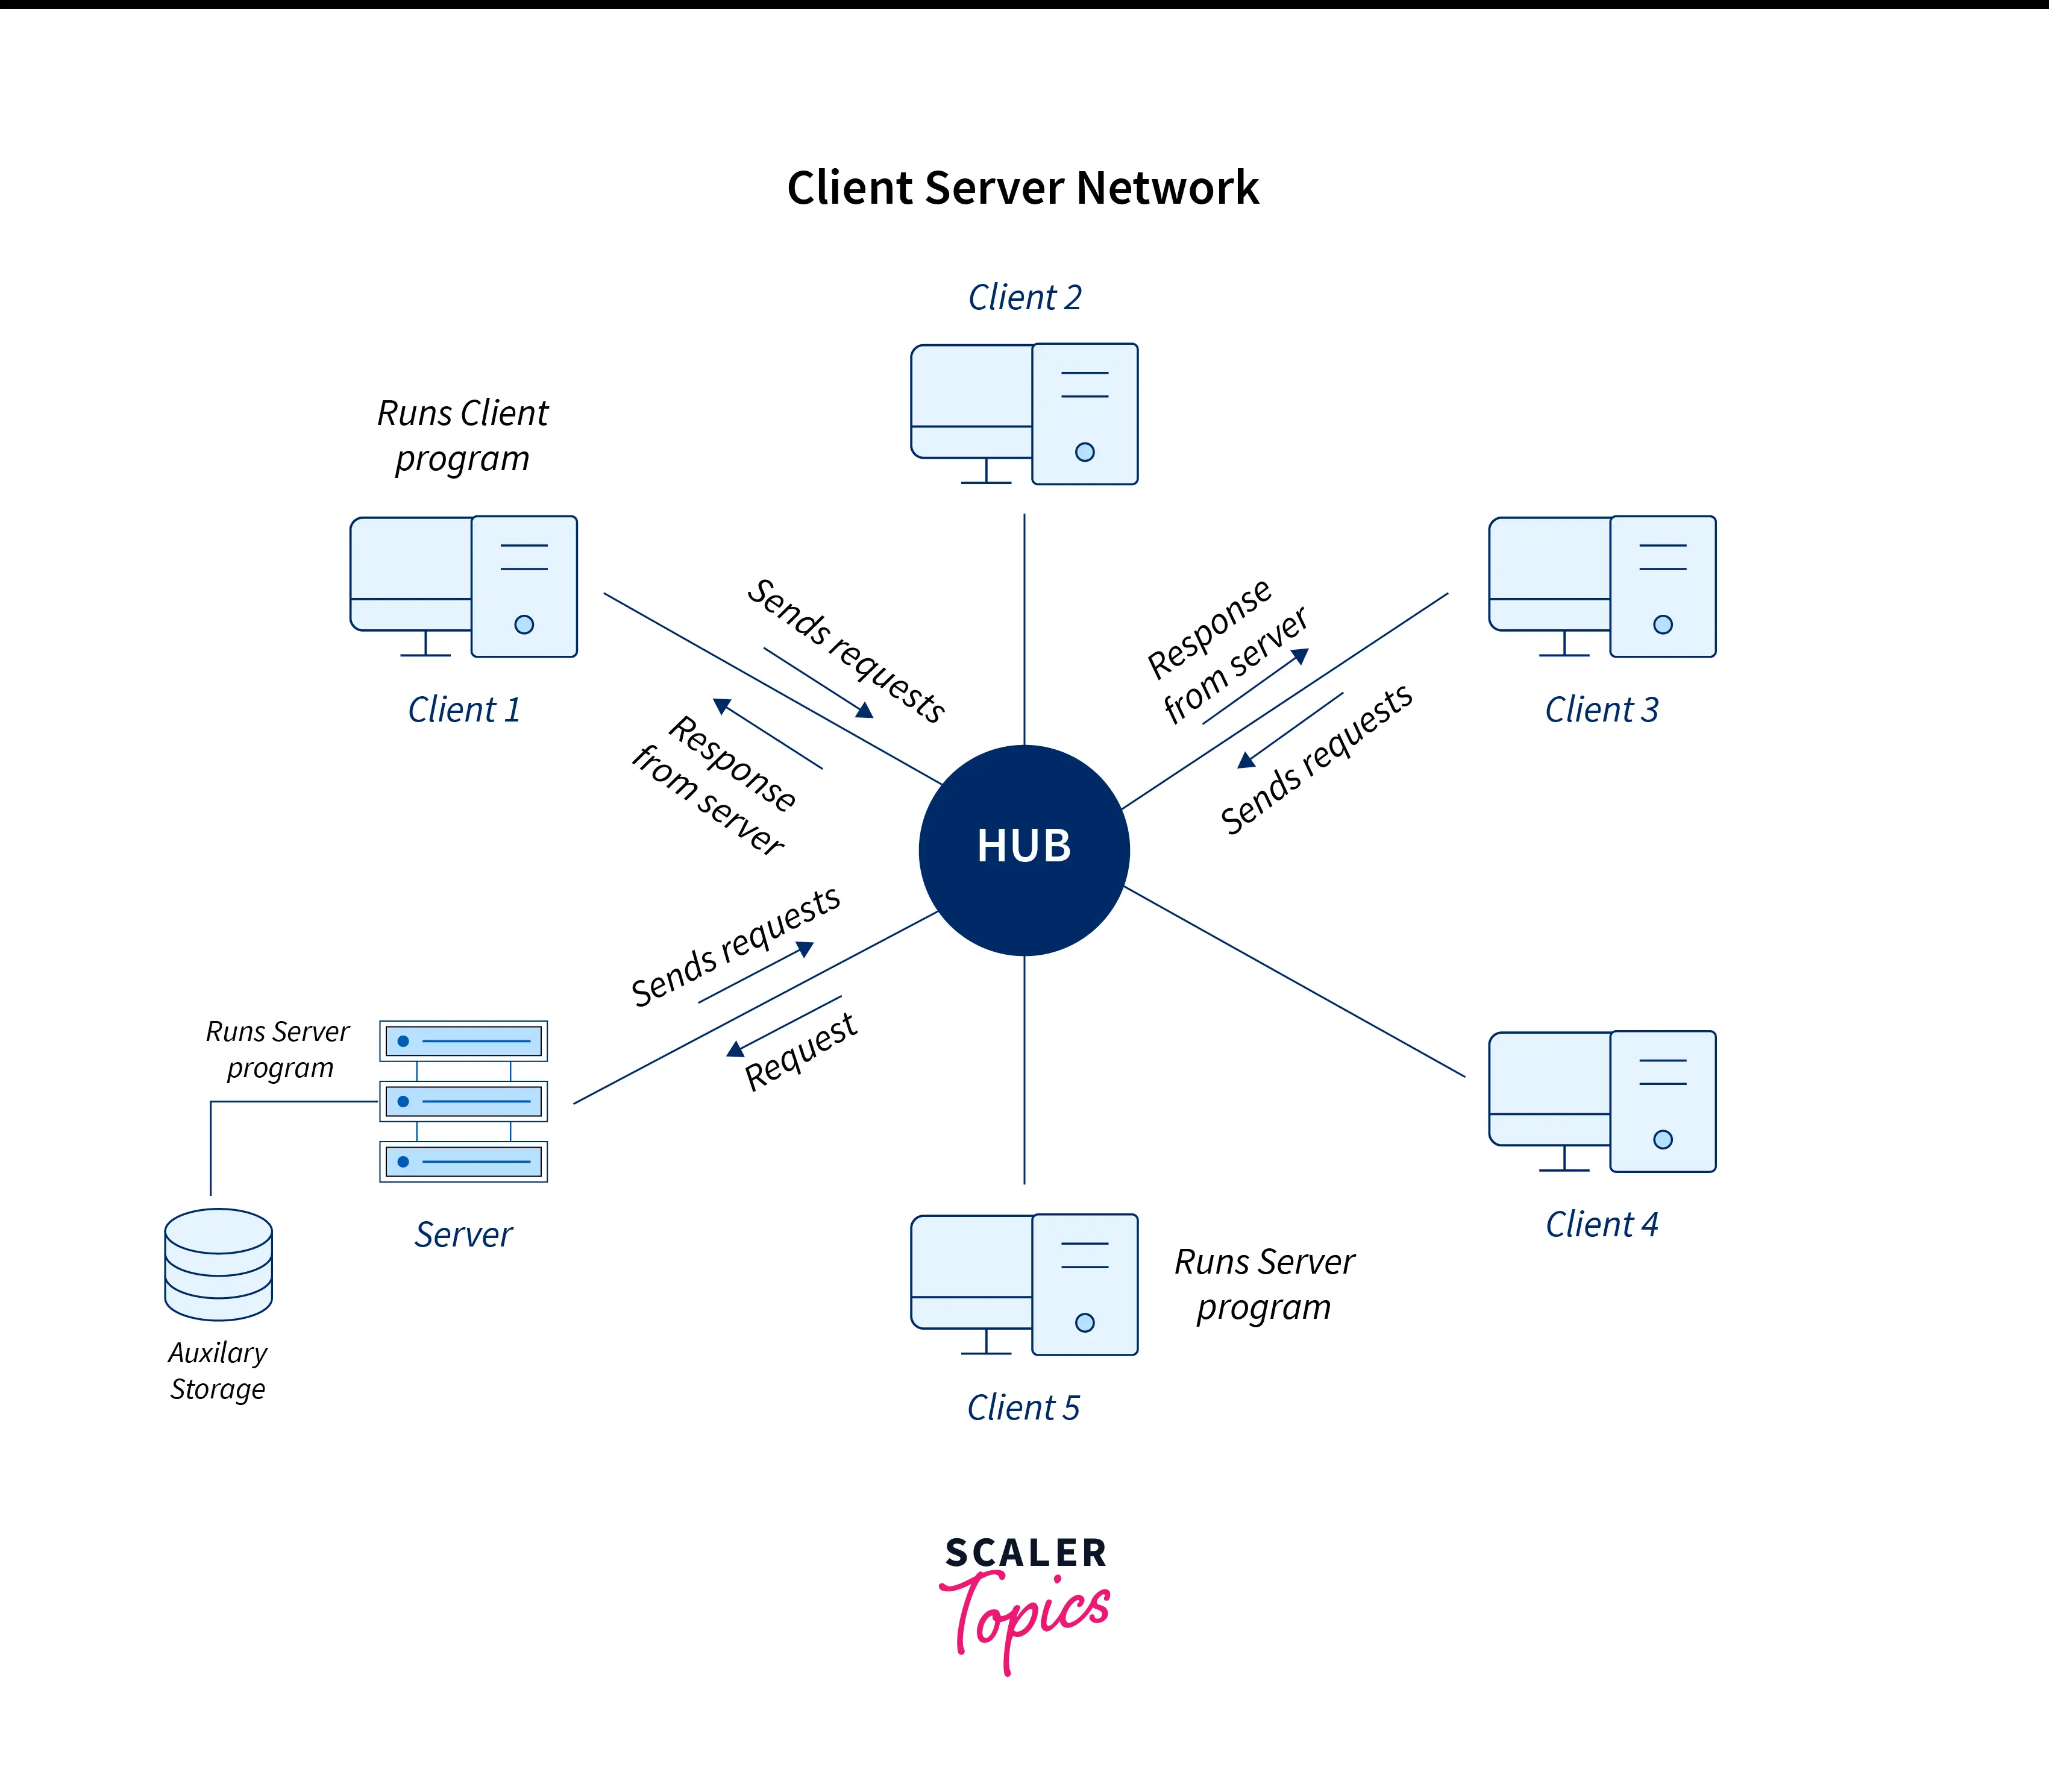 Client server networking operating system